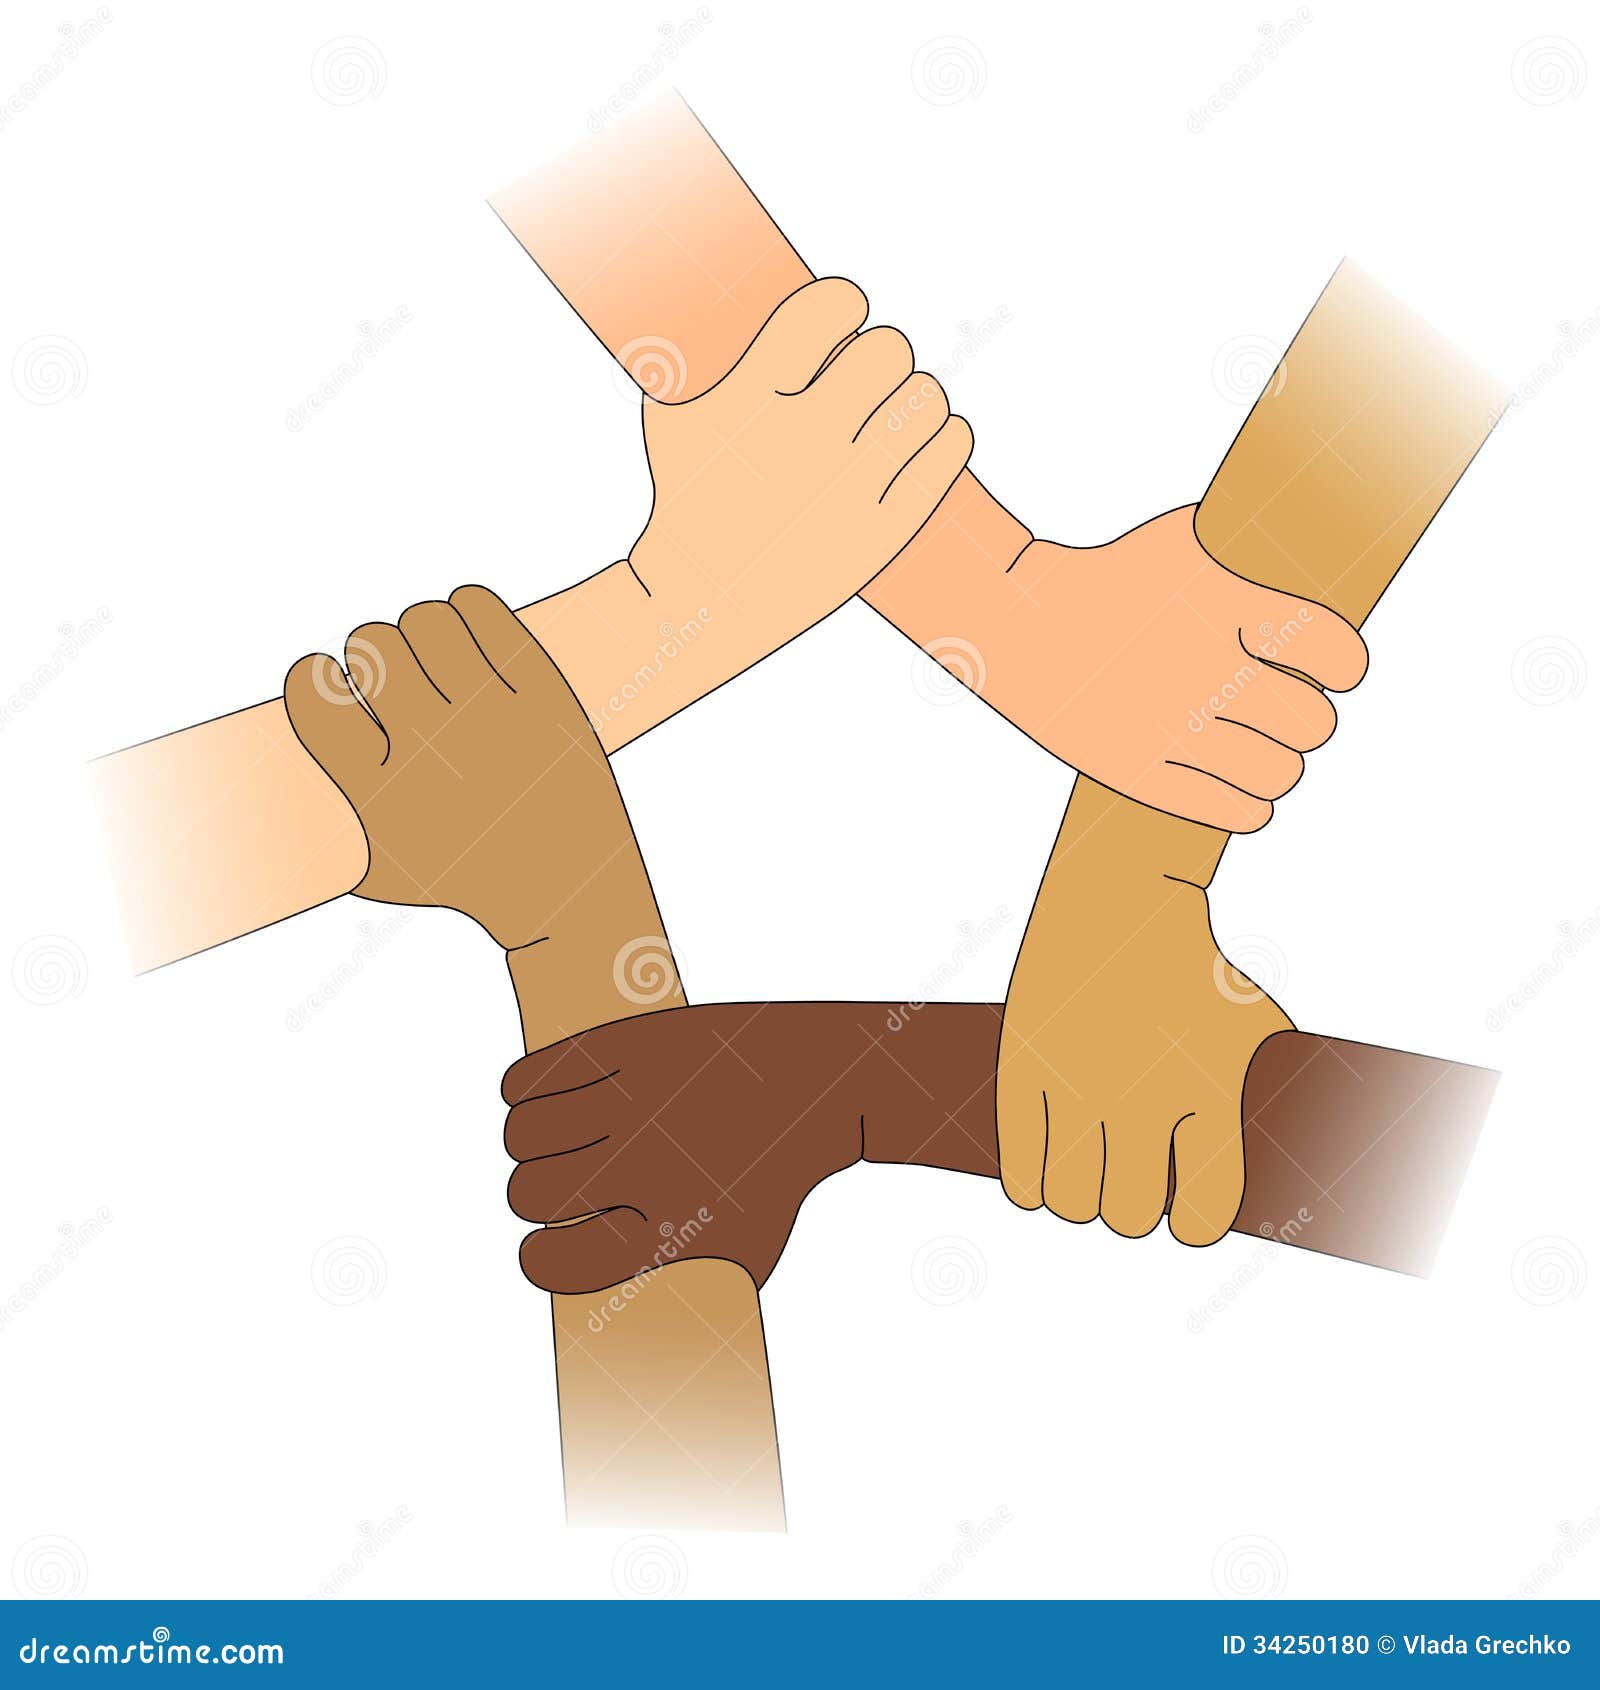 Hands Of Different Races Stock Photo  Image: 34250180